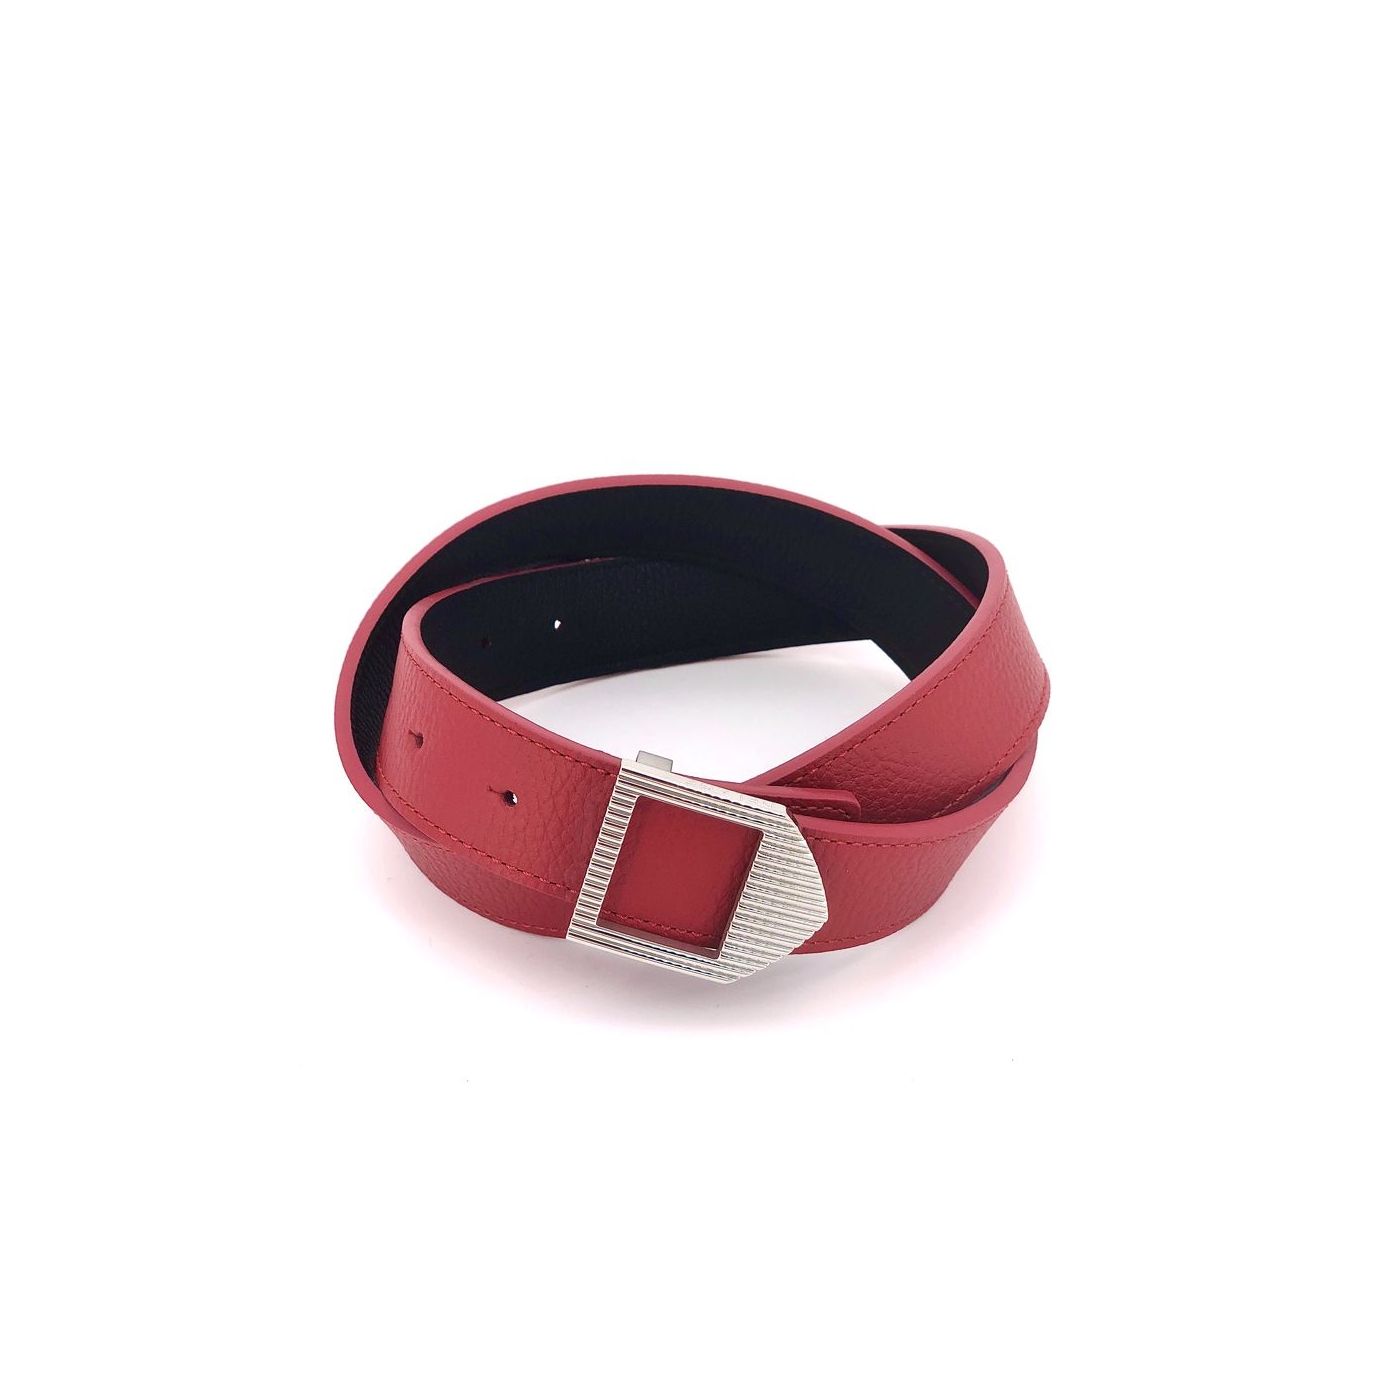 Reversible leather belt red & black / silver buckle